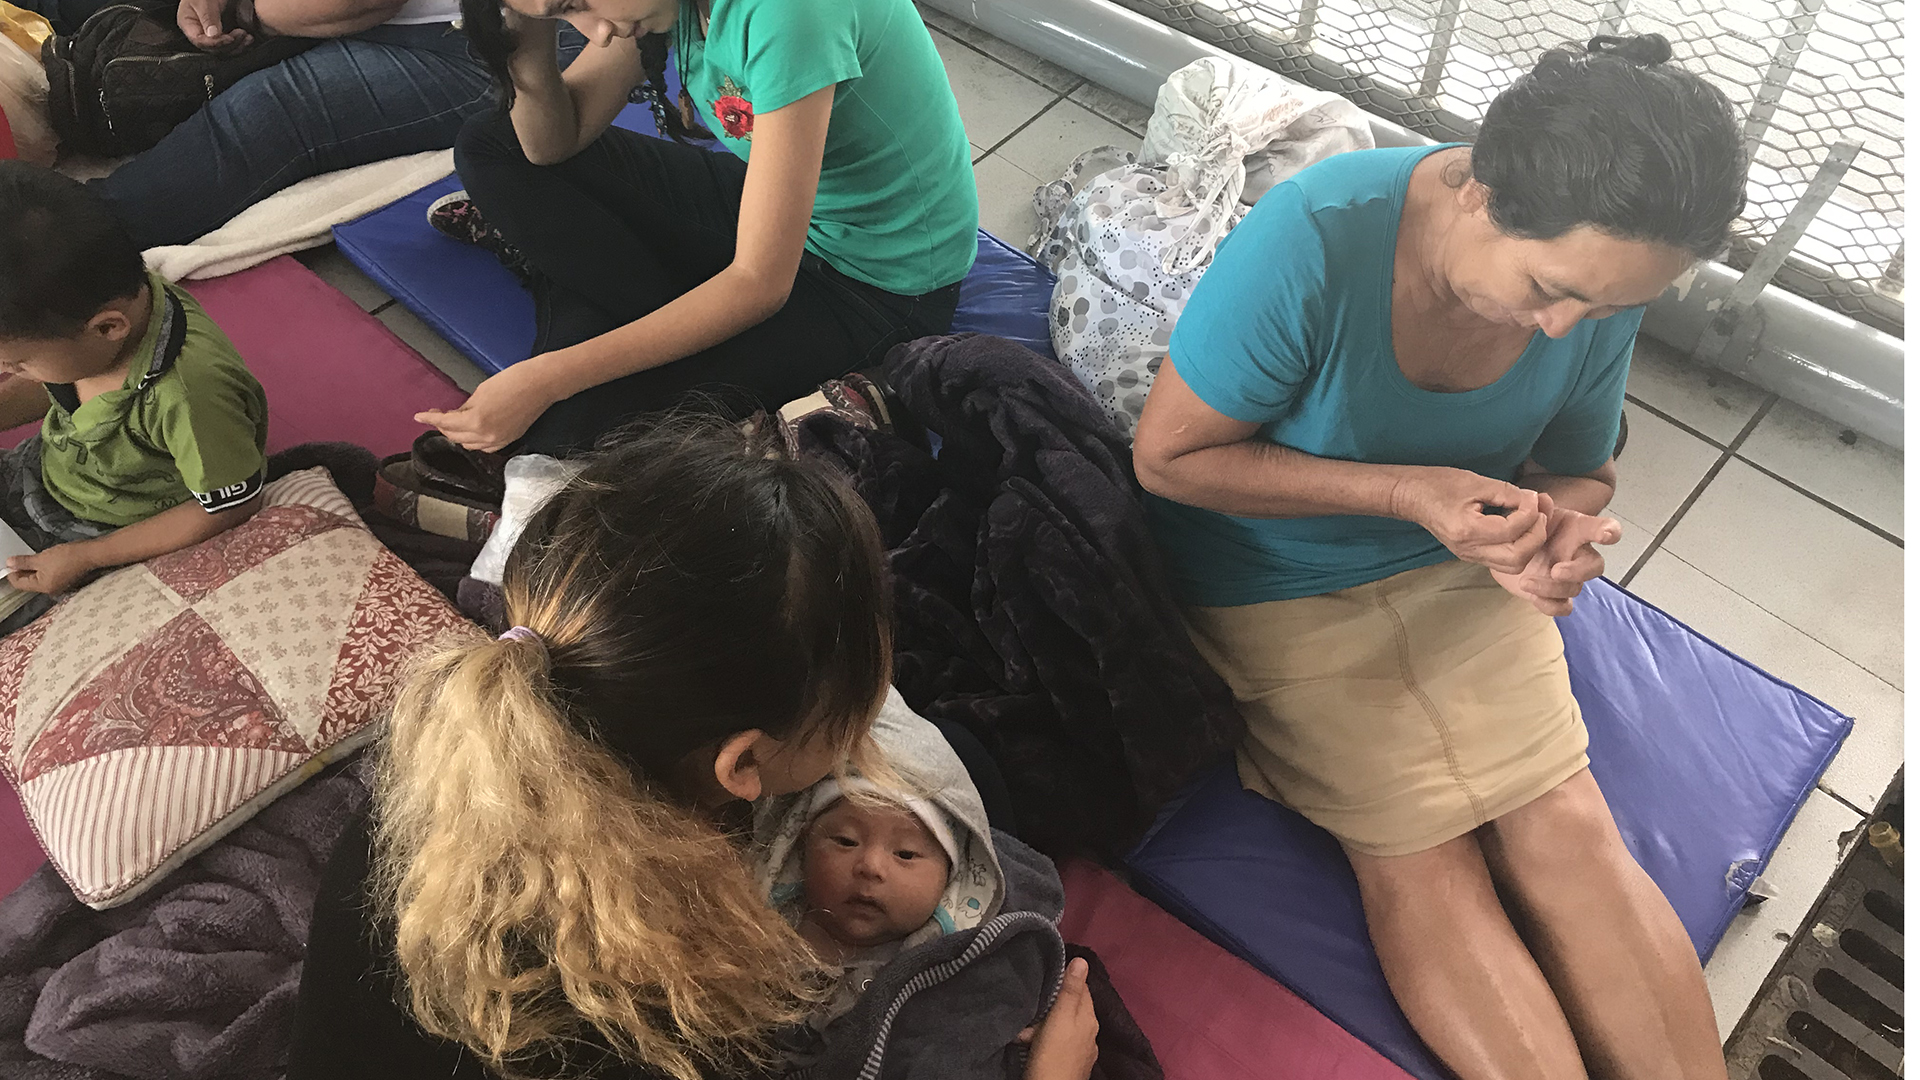 Women with children waiting to apply for asylum at the Nogales Port of Entry.  They are claiming domestic violence in their home countries. (July 5, 2018)